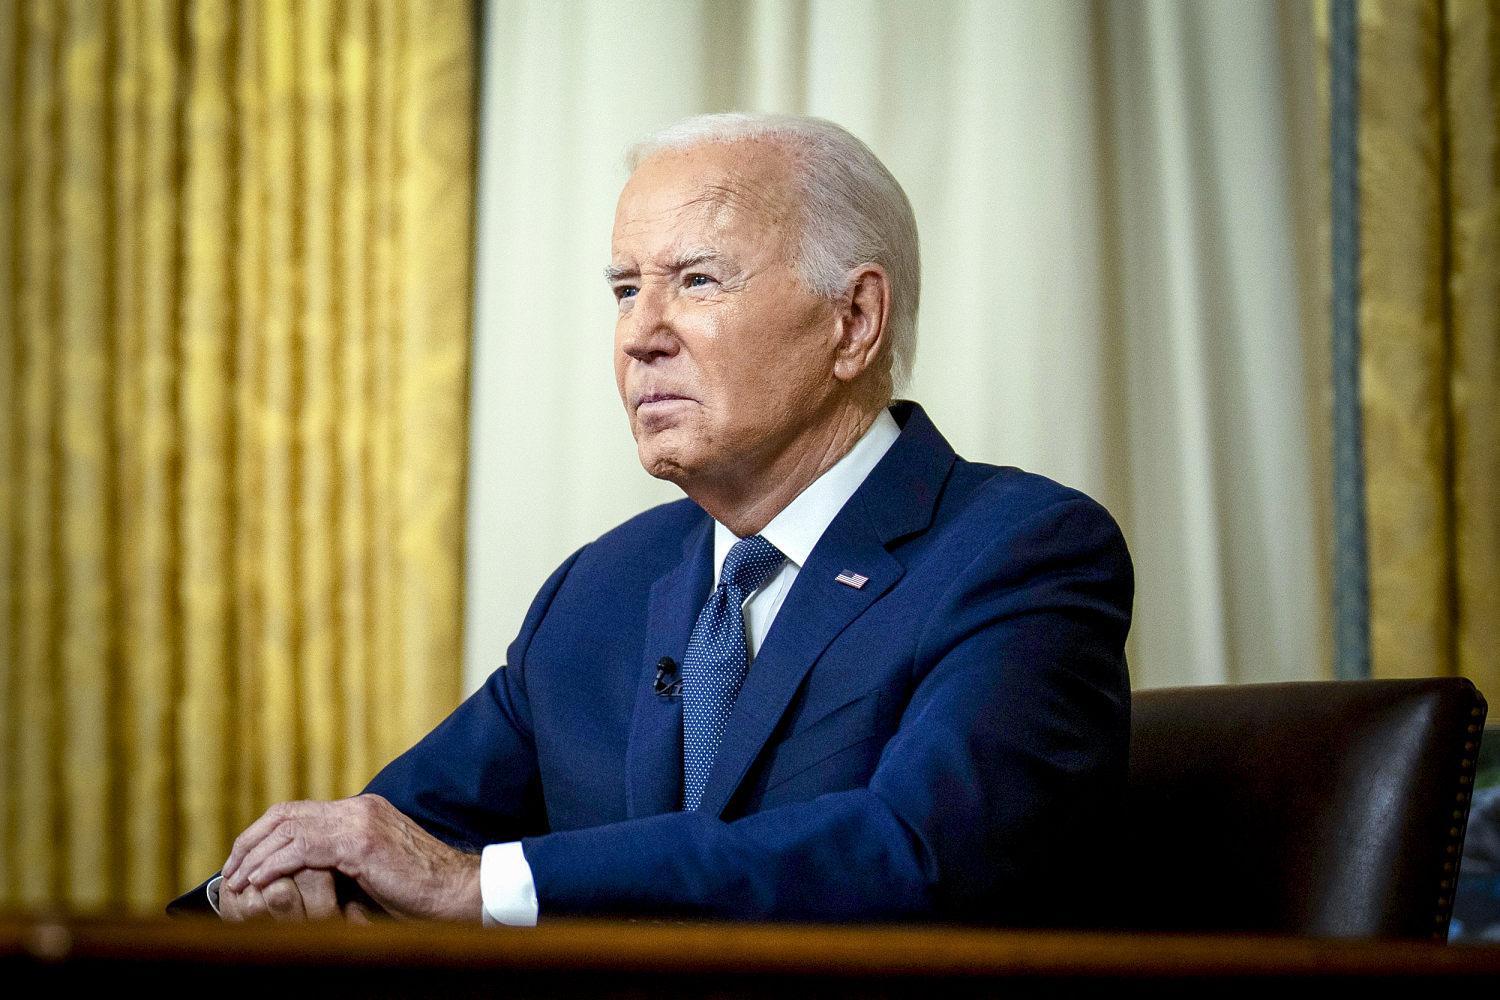 Group of House Democrats pushes to delay Biden nomination